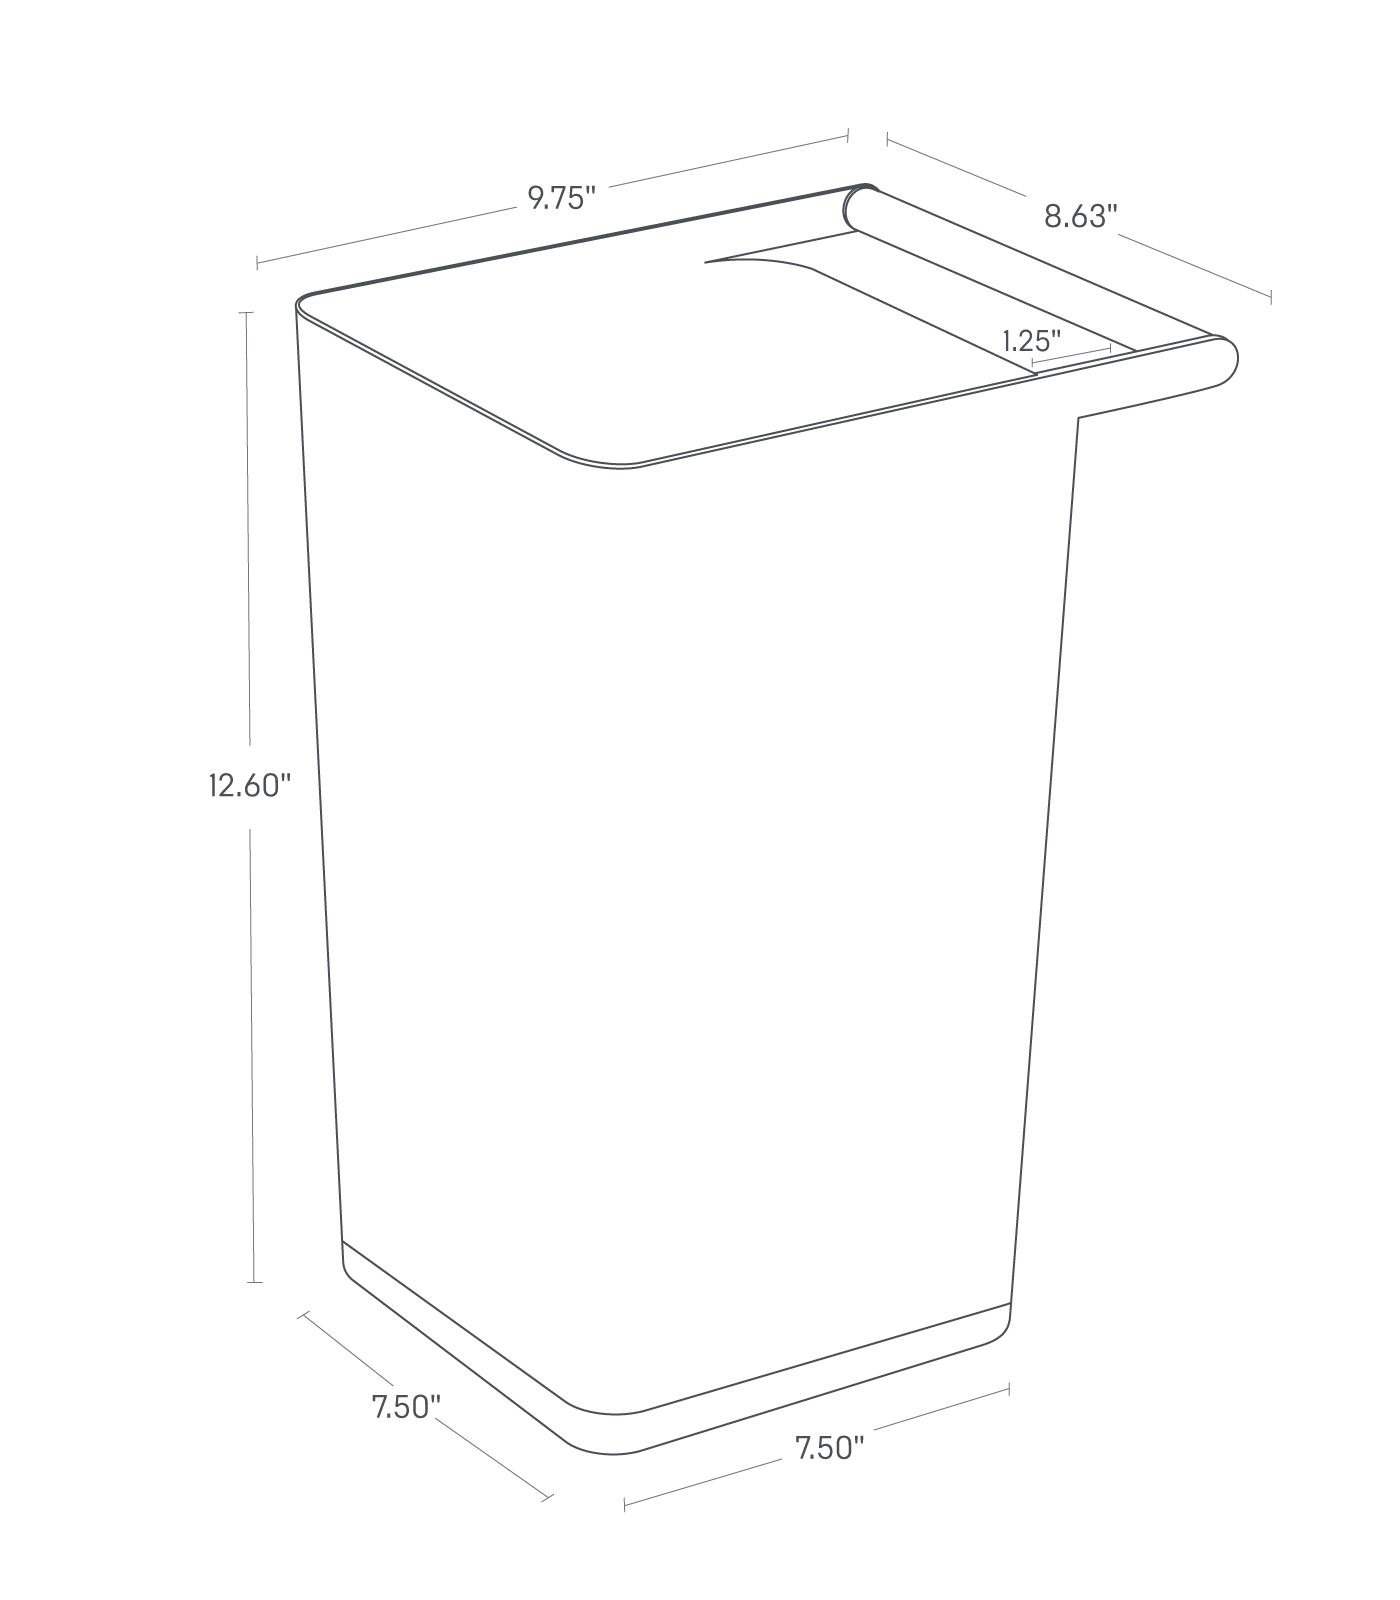 Dimension image for Trash Can showing a bottom length and width of 7.5